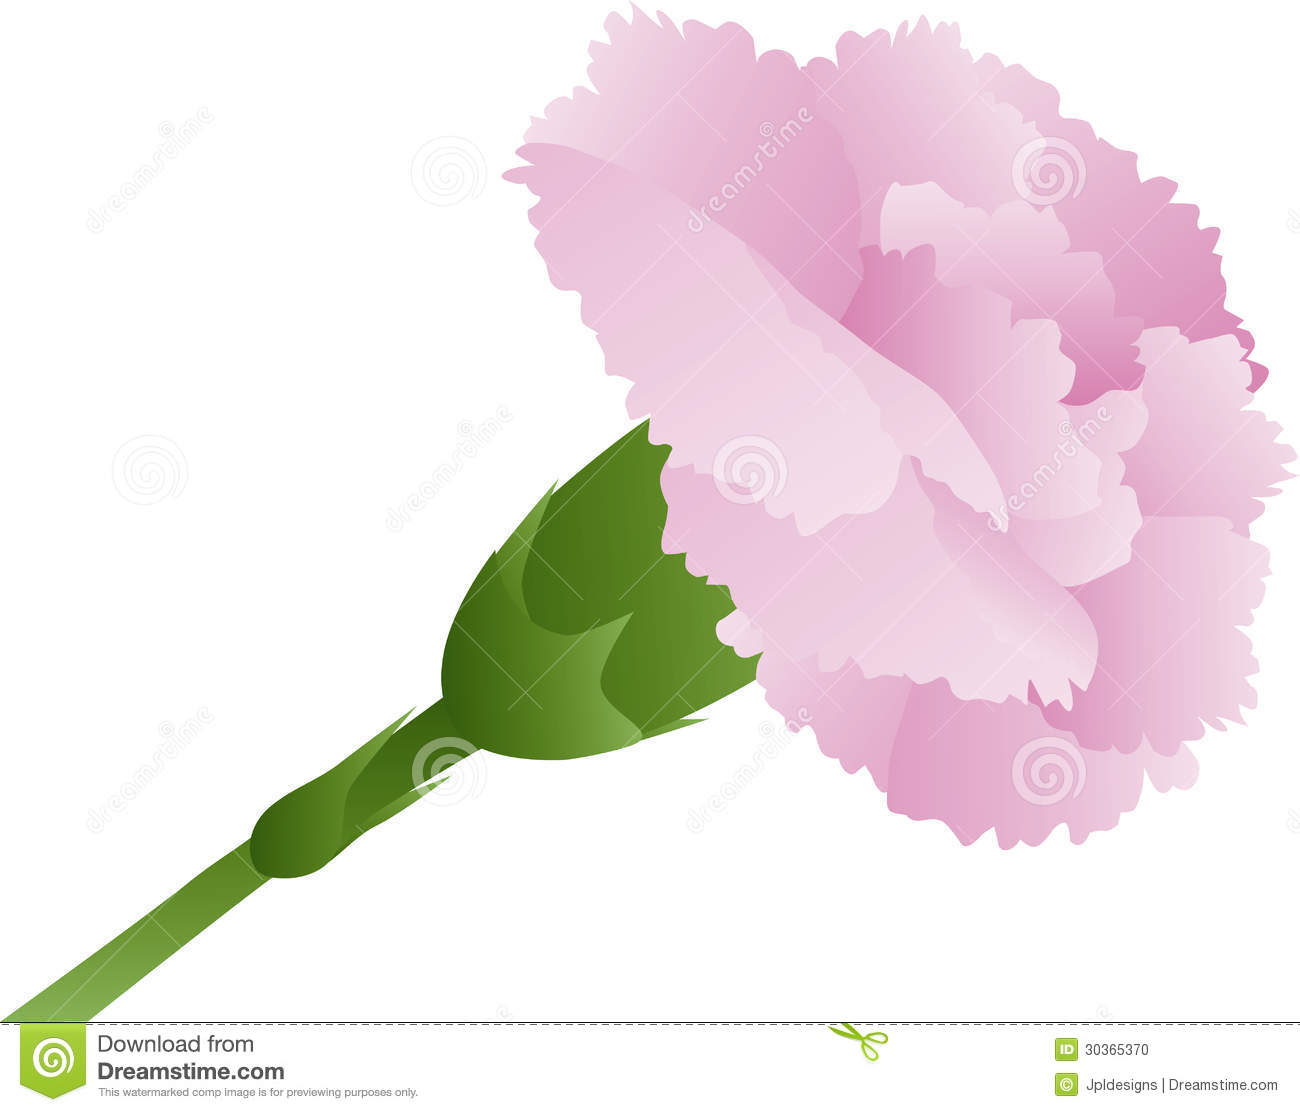 Pink Carnation Flower With Green Stalk Isolated On White Background